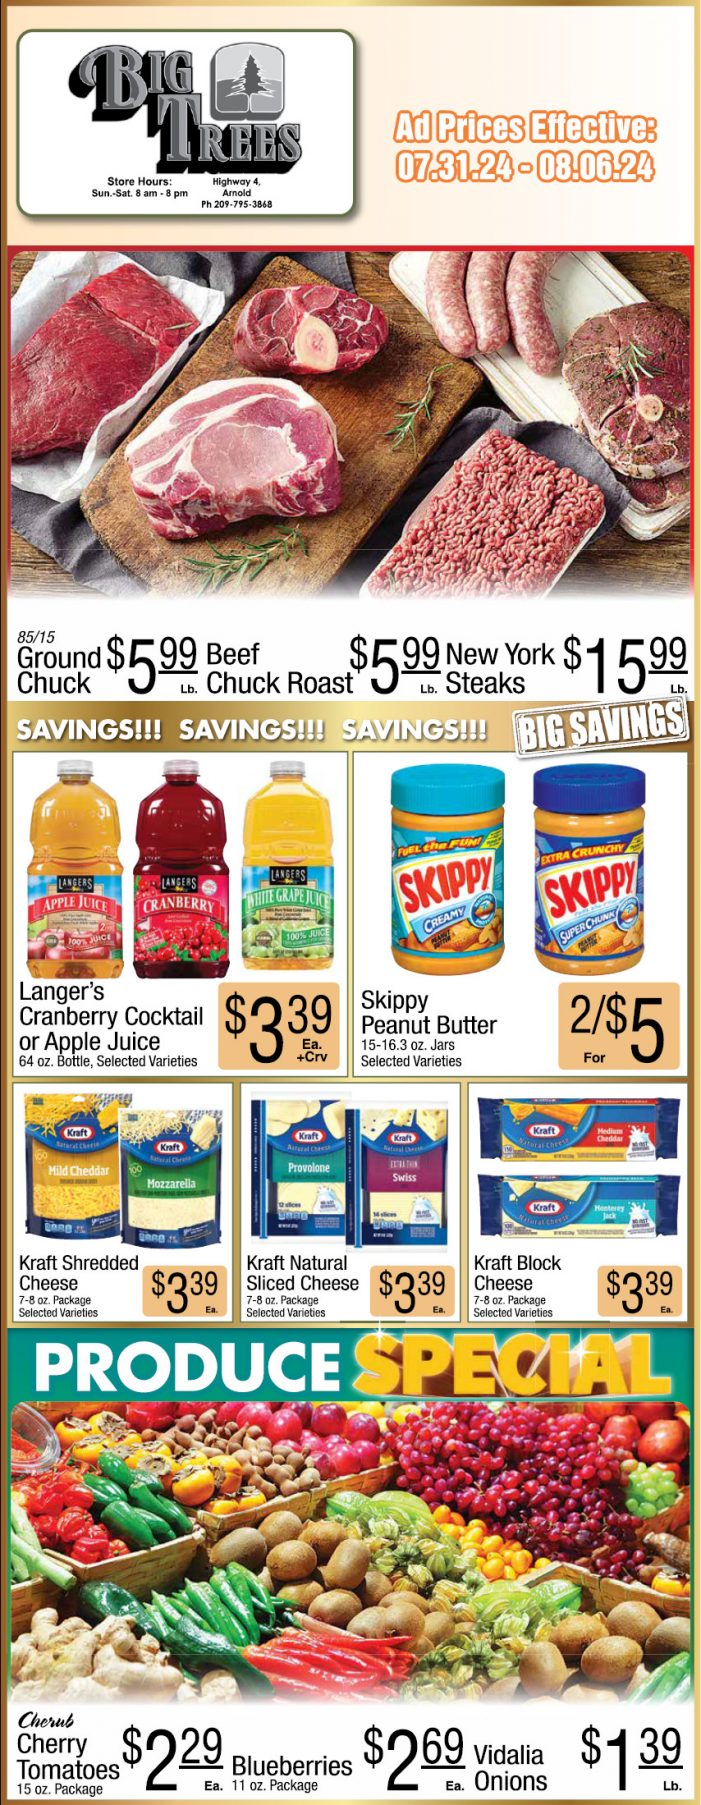 Big Trees Market Weekly Ad, Grocery, Produce, Meat & Deli Specials July 31 – August 6! Shop Local & Save!